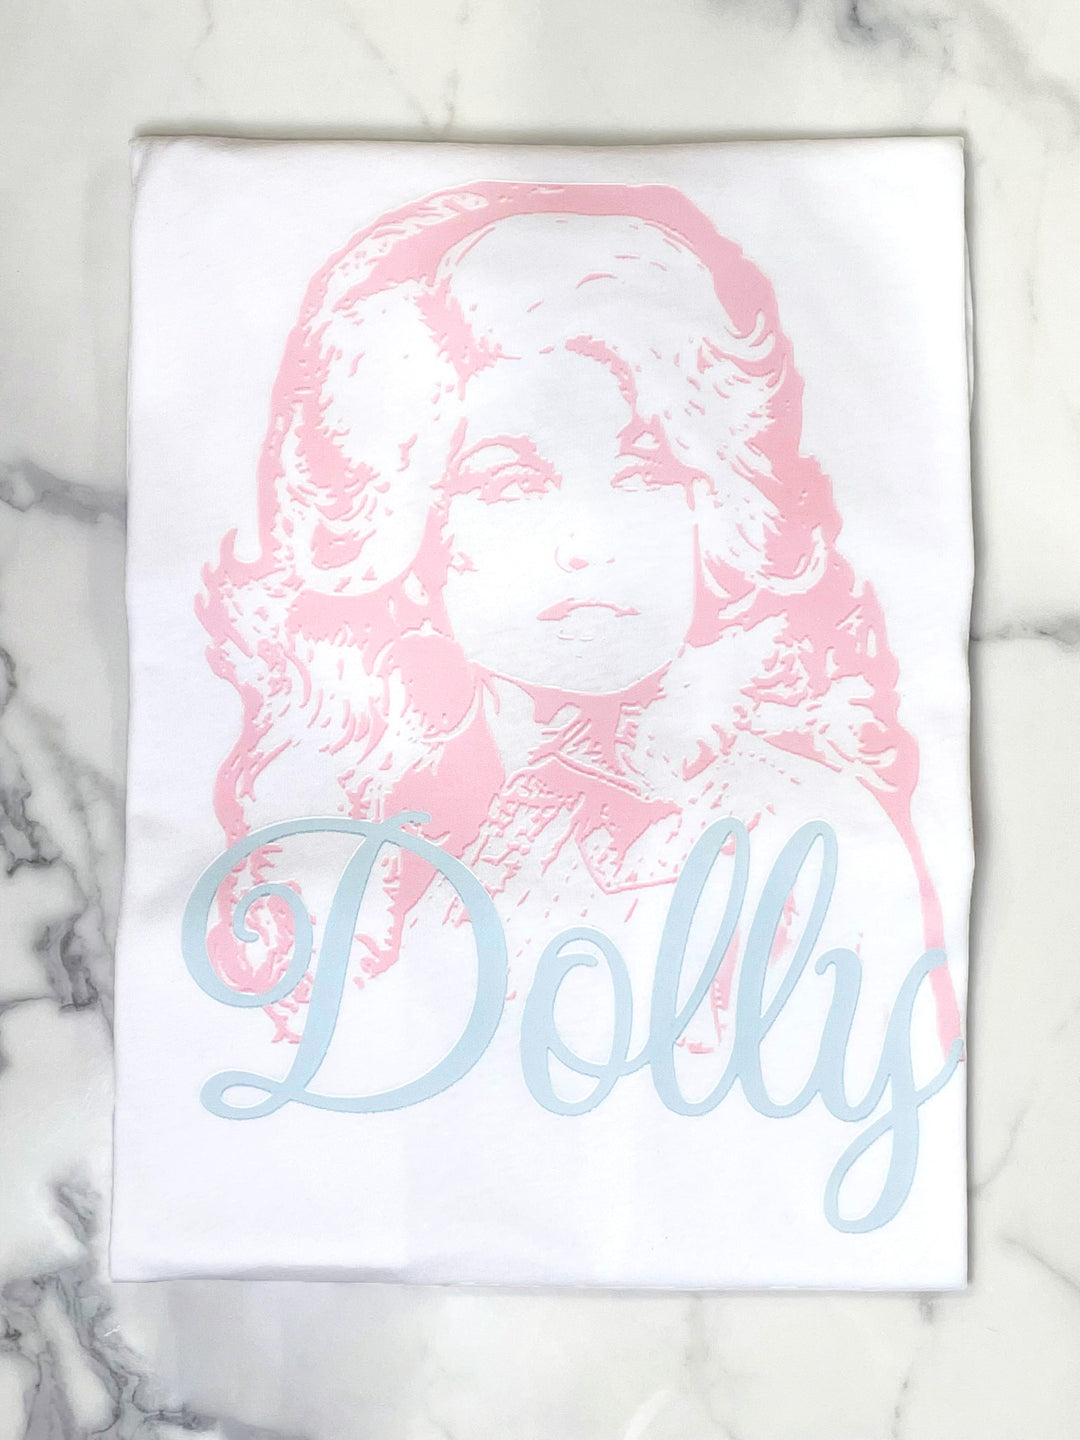 Glamfox - Dolly Graphic Top